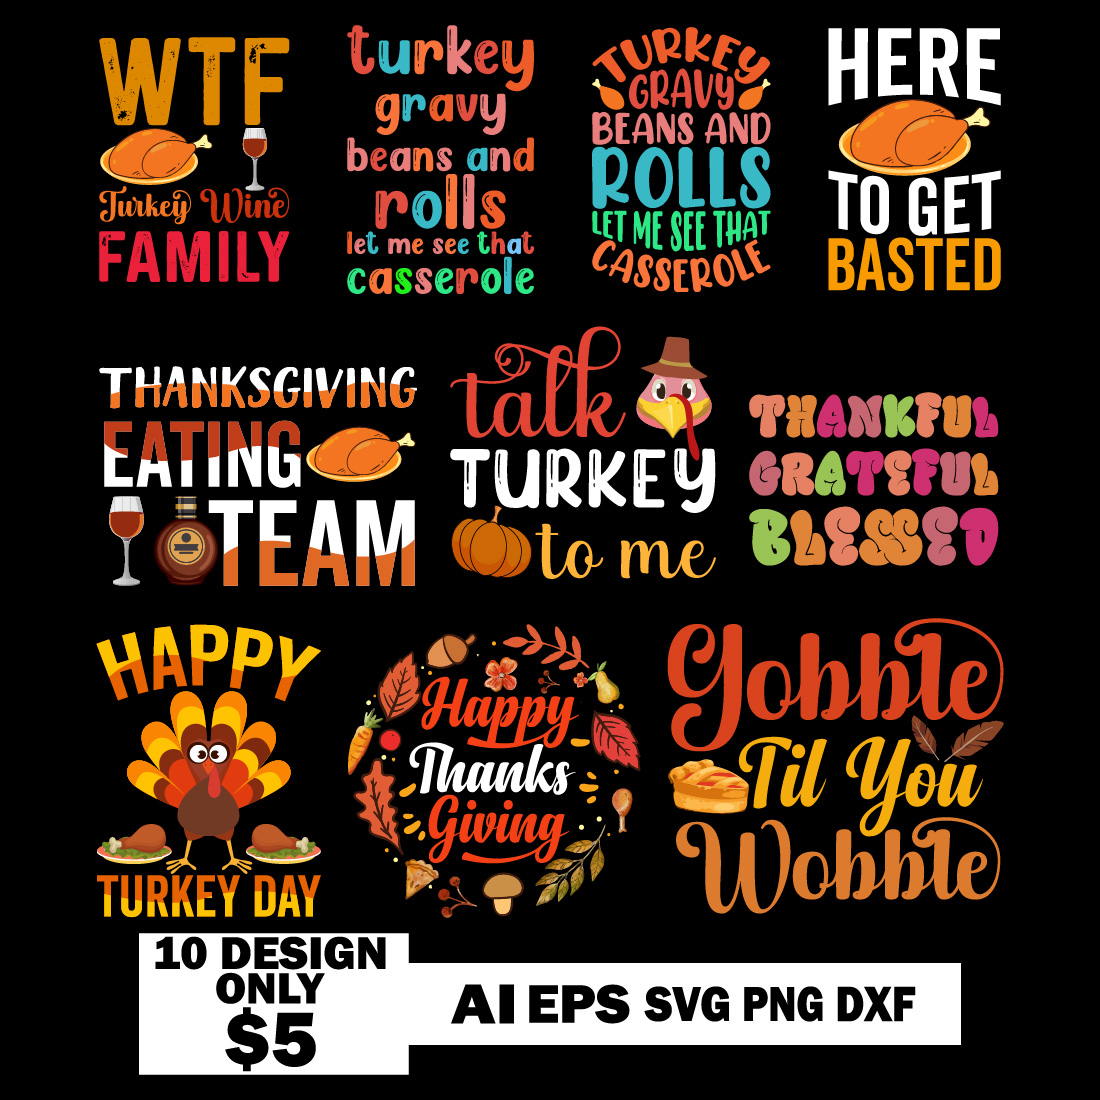 Happy Thanksgiving Day T-shirt Design Typography cover image.